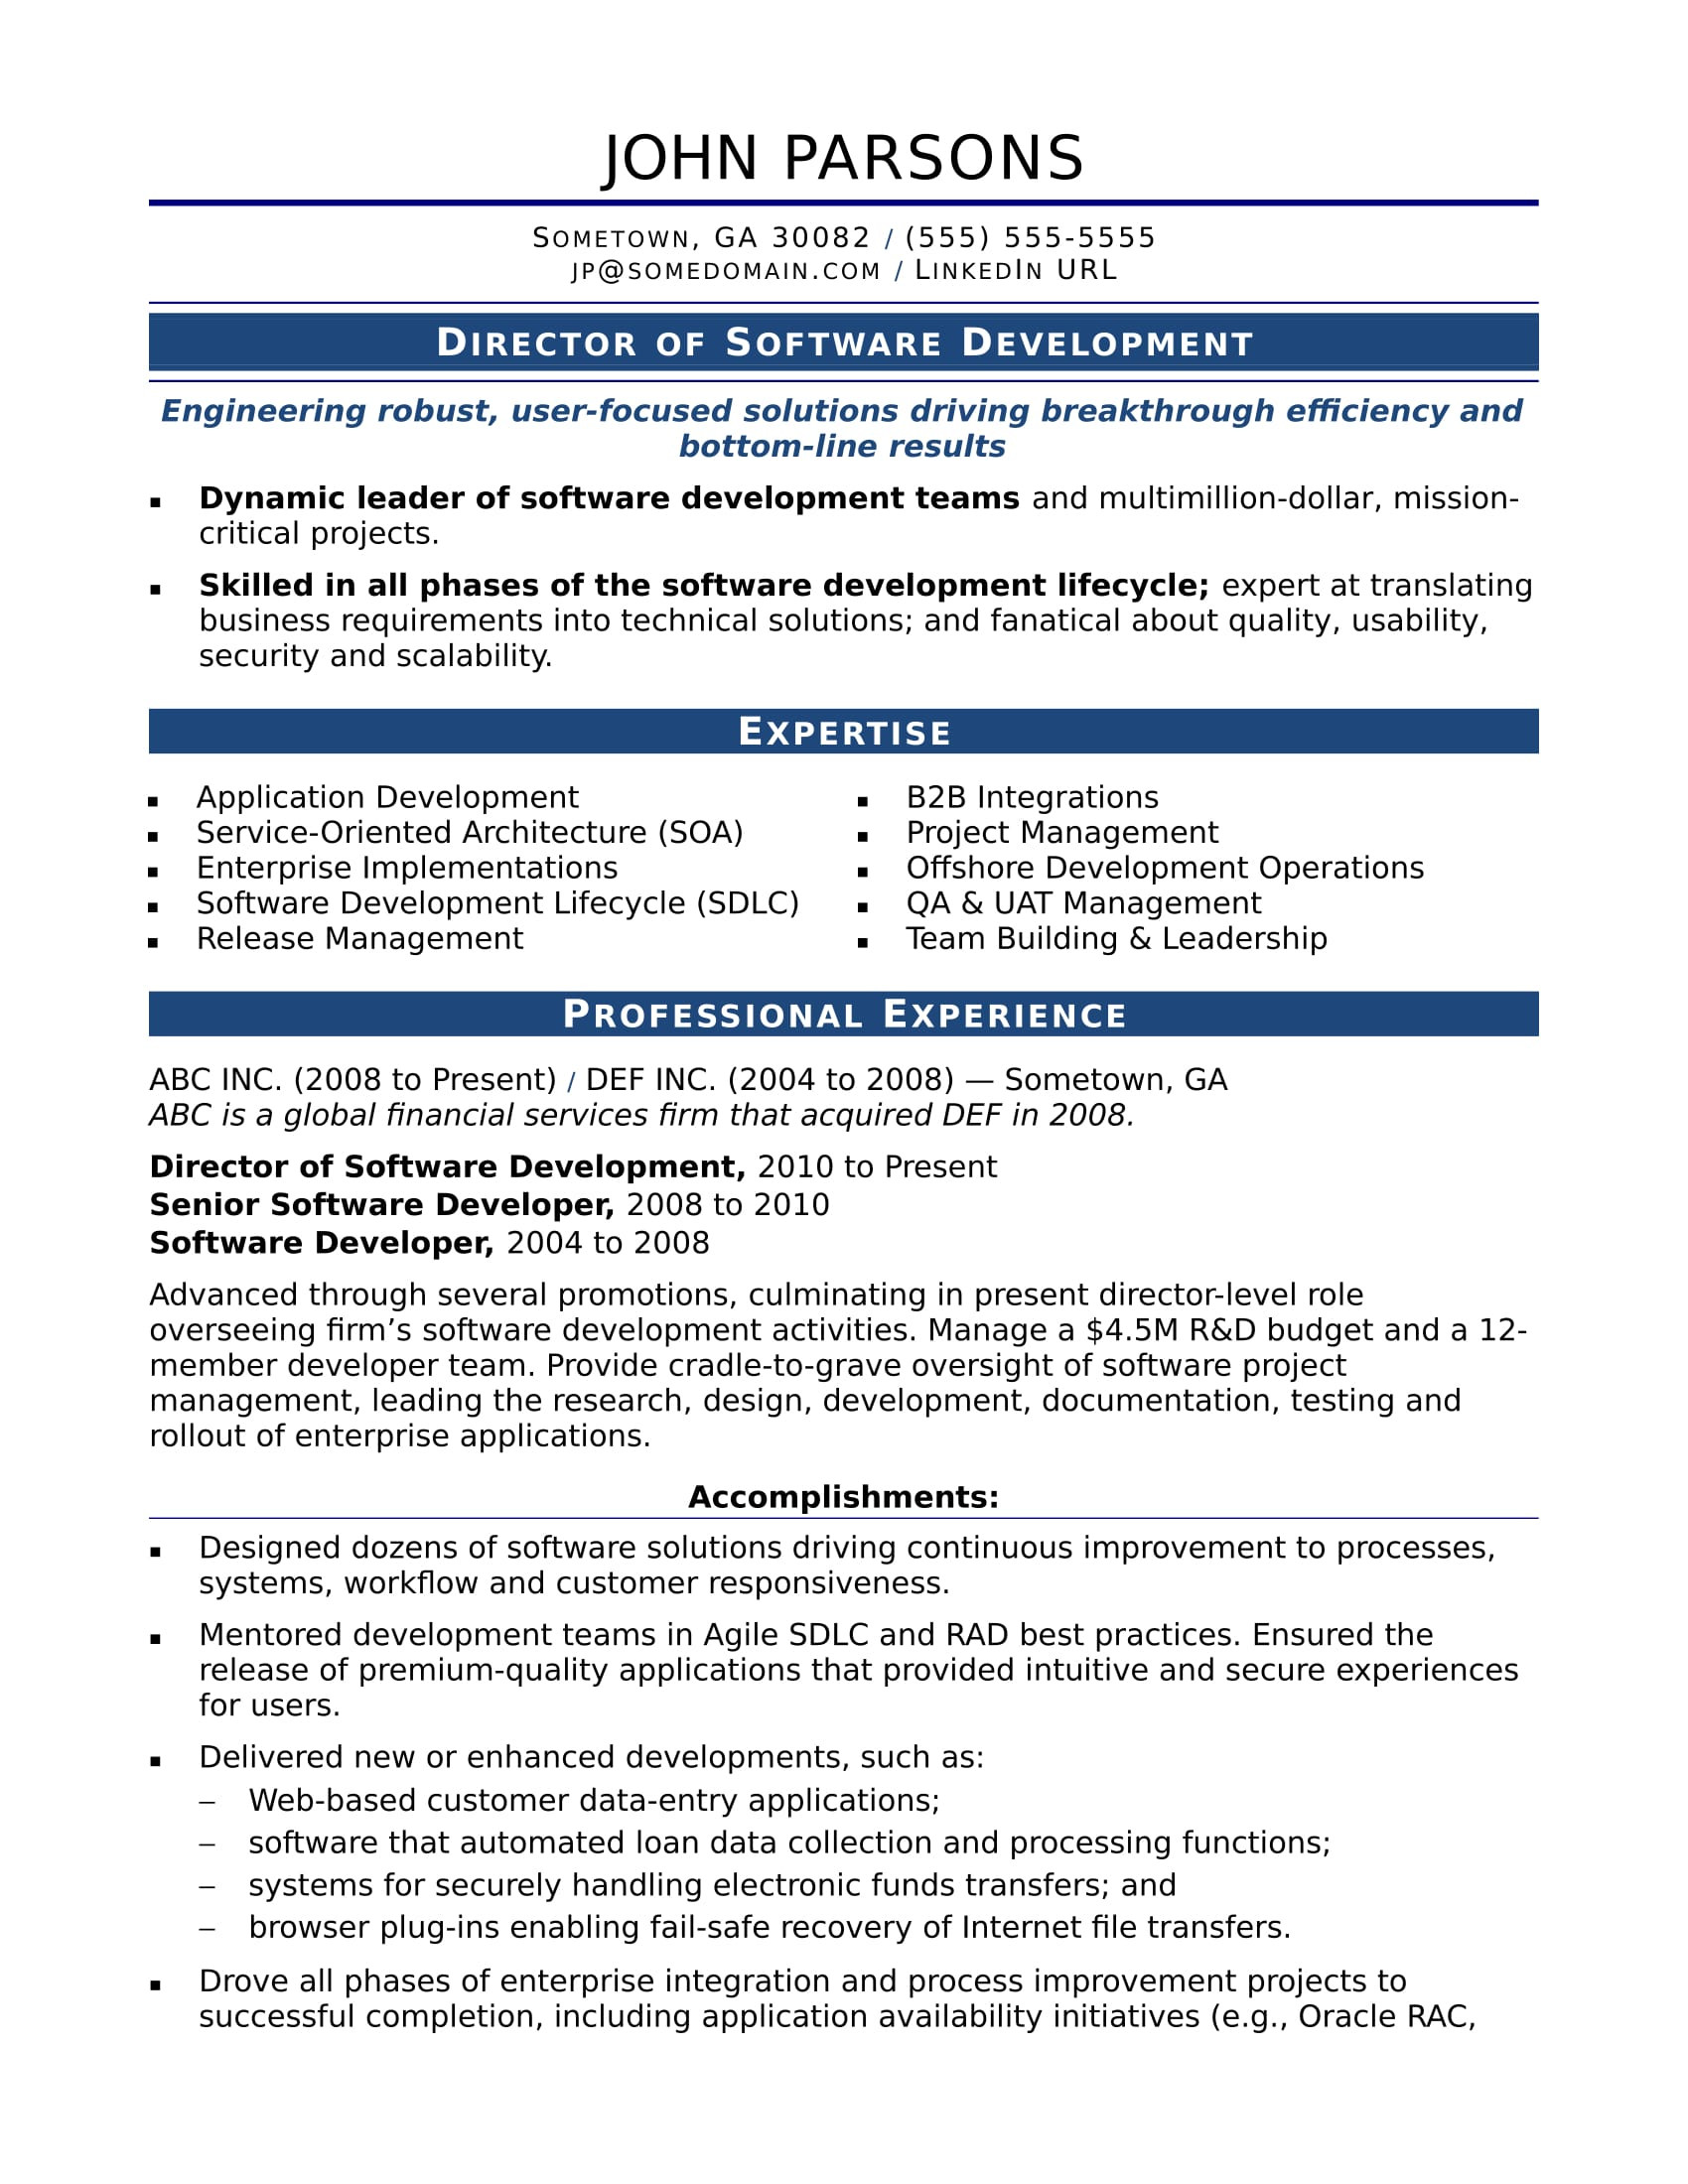 Sample Resume with Different Work Experience Sample Resume for An Experienced It Developer Monster.com